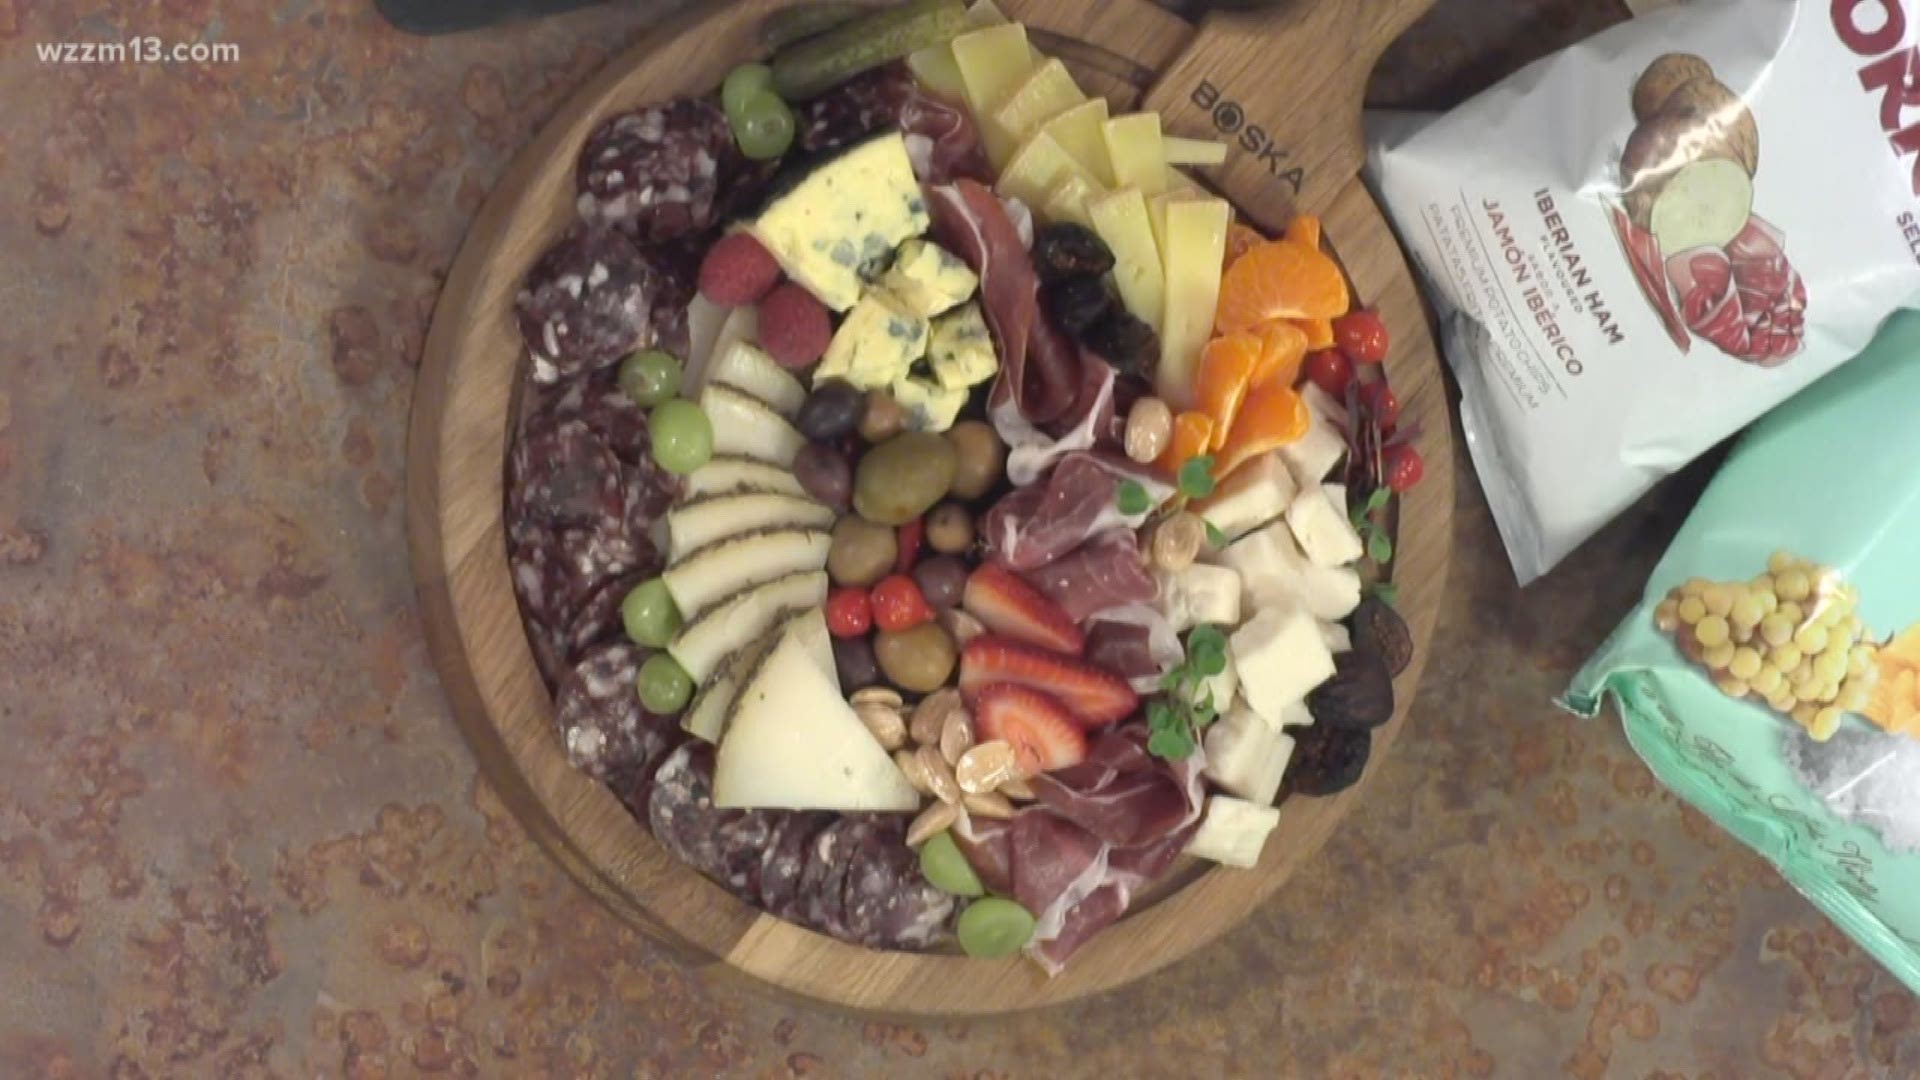 What's Cooking: Meat and cheese trays